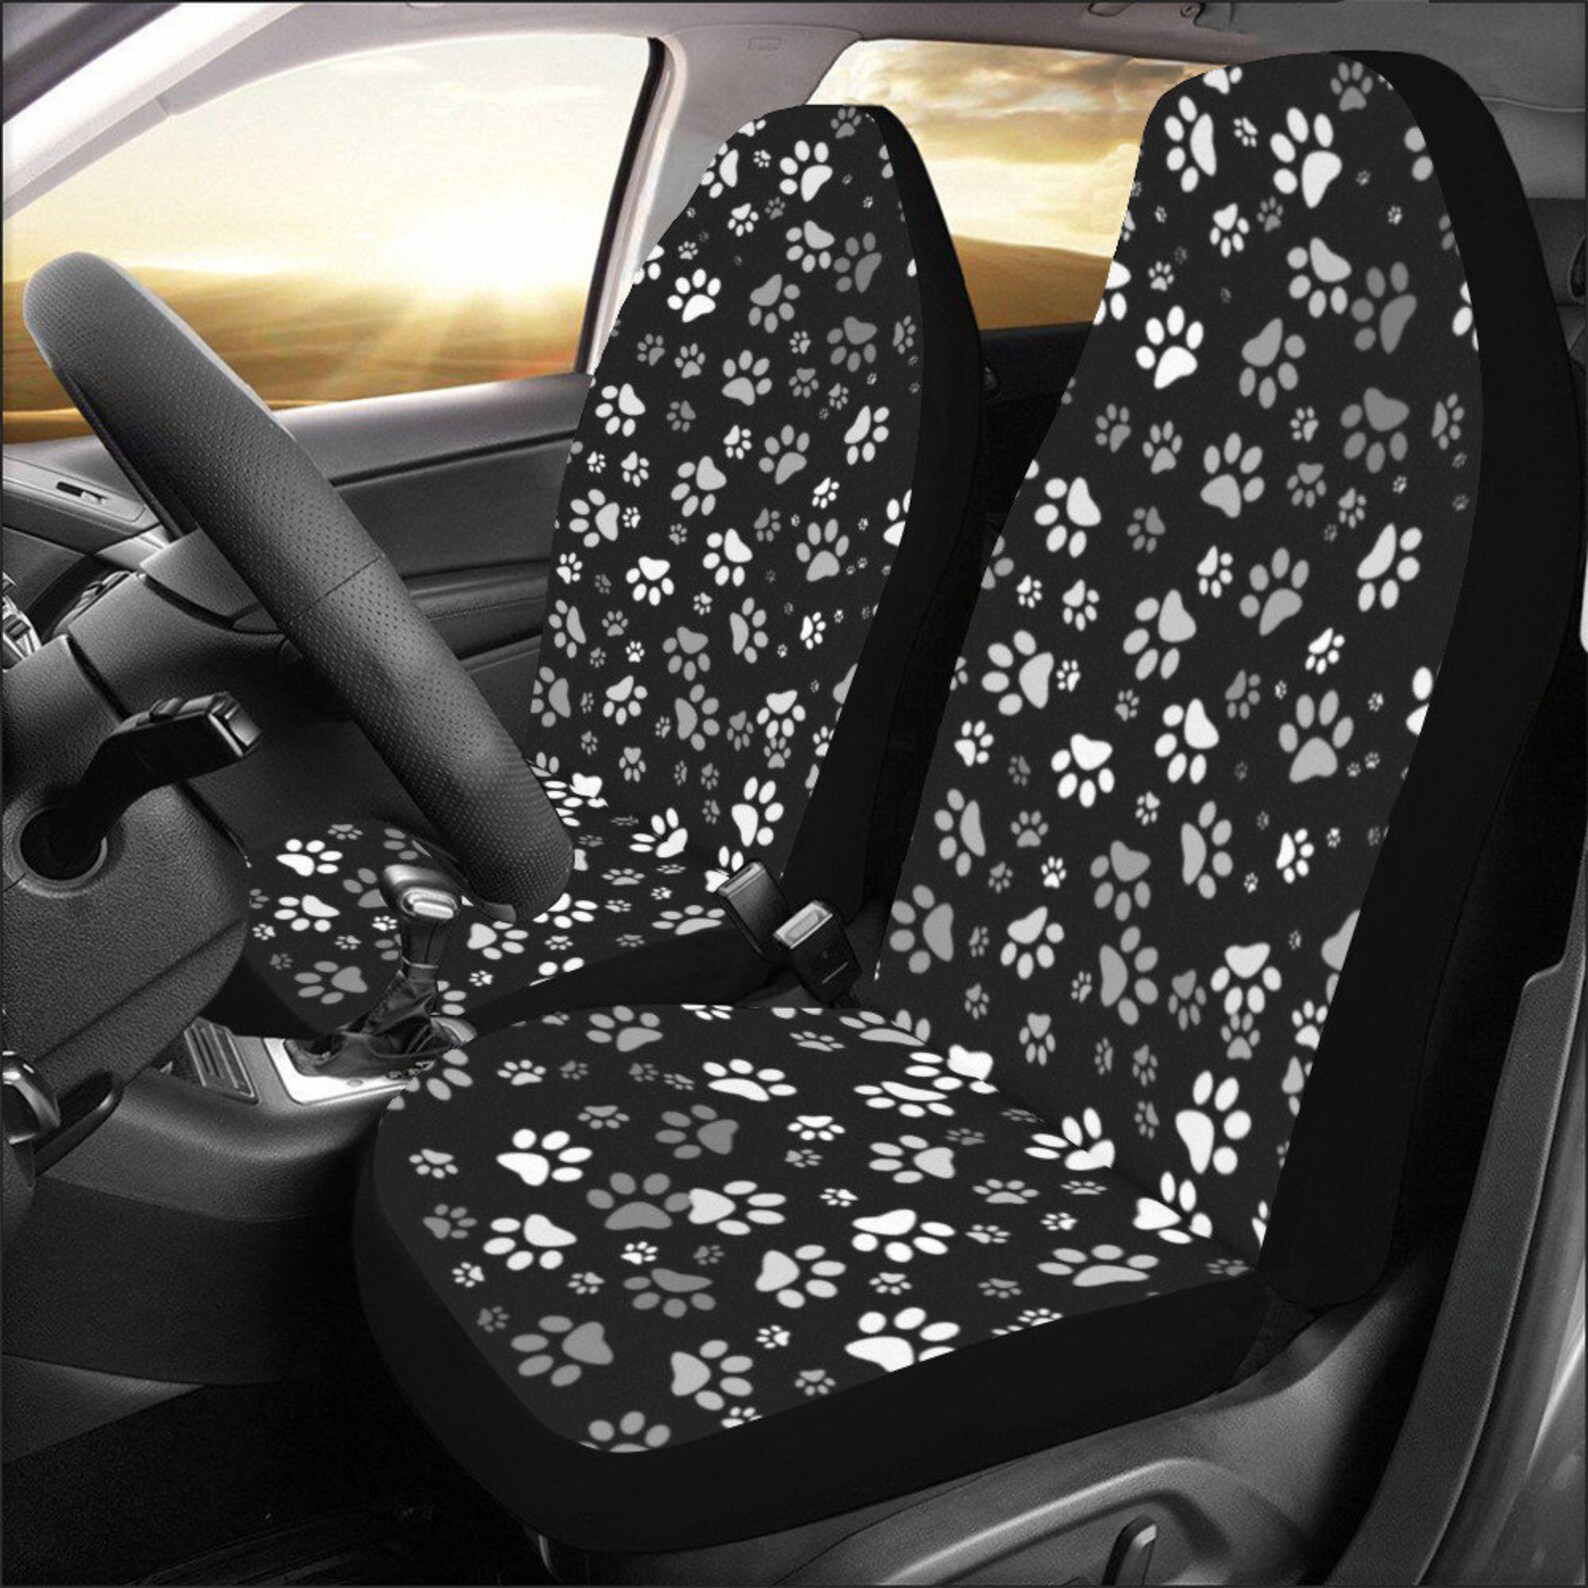 Dog Paw Car Seat Covers Black Paw Print Car Seat Coverings - Etsy